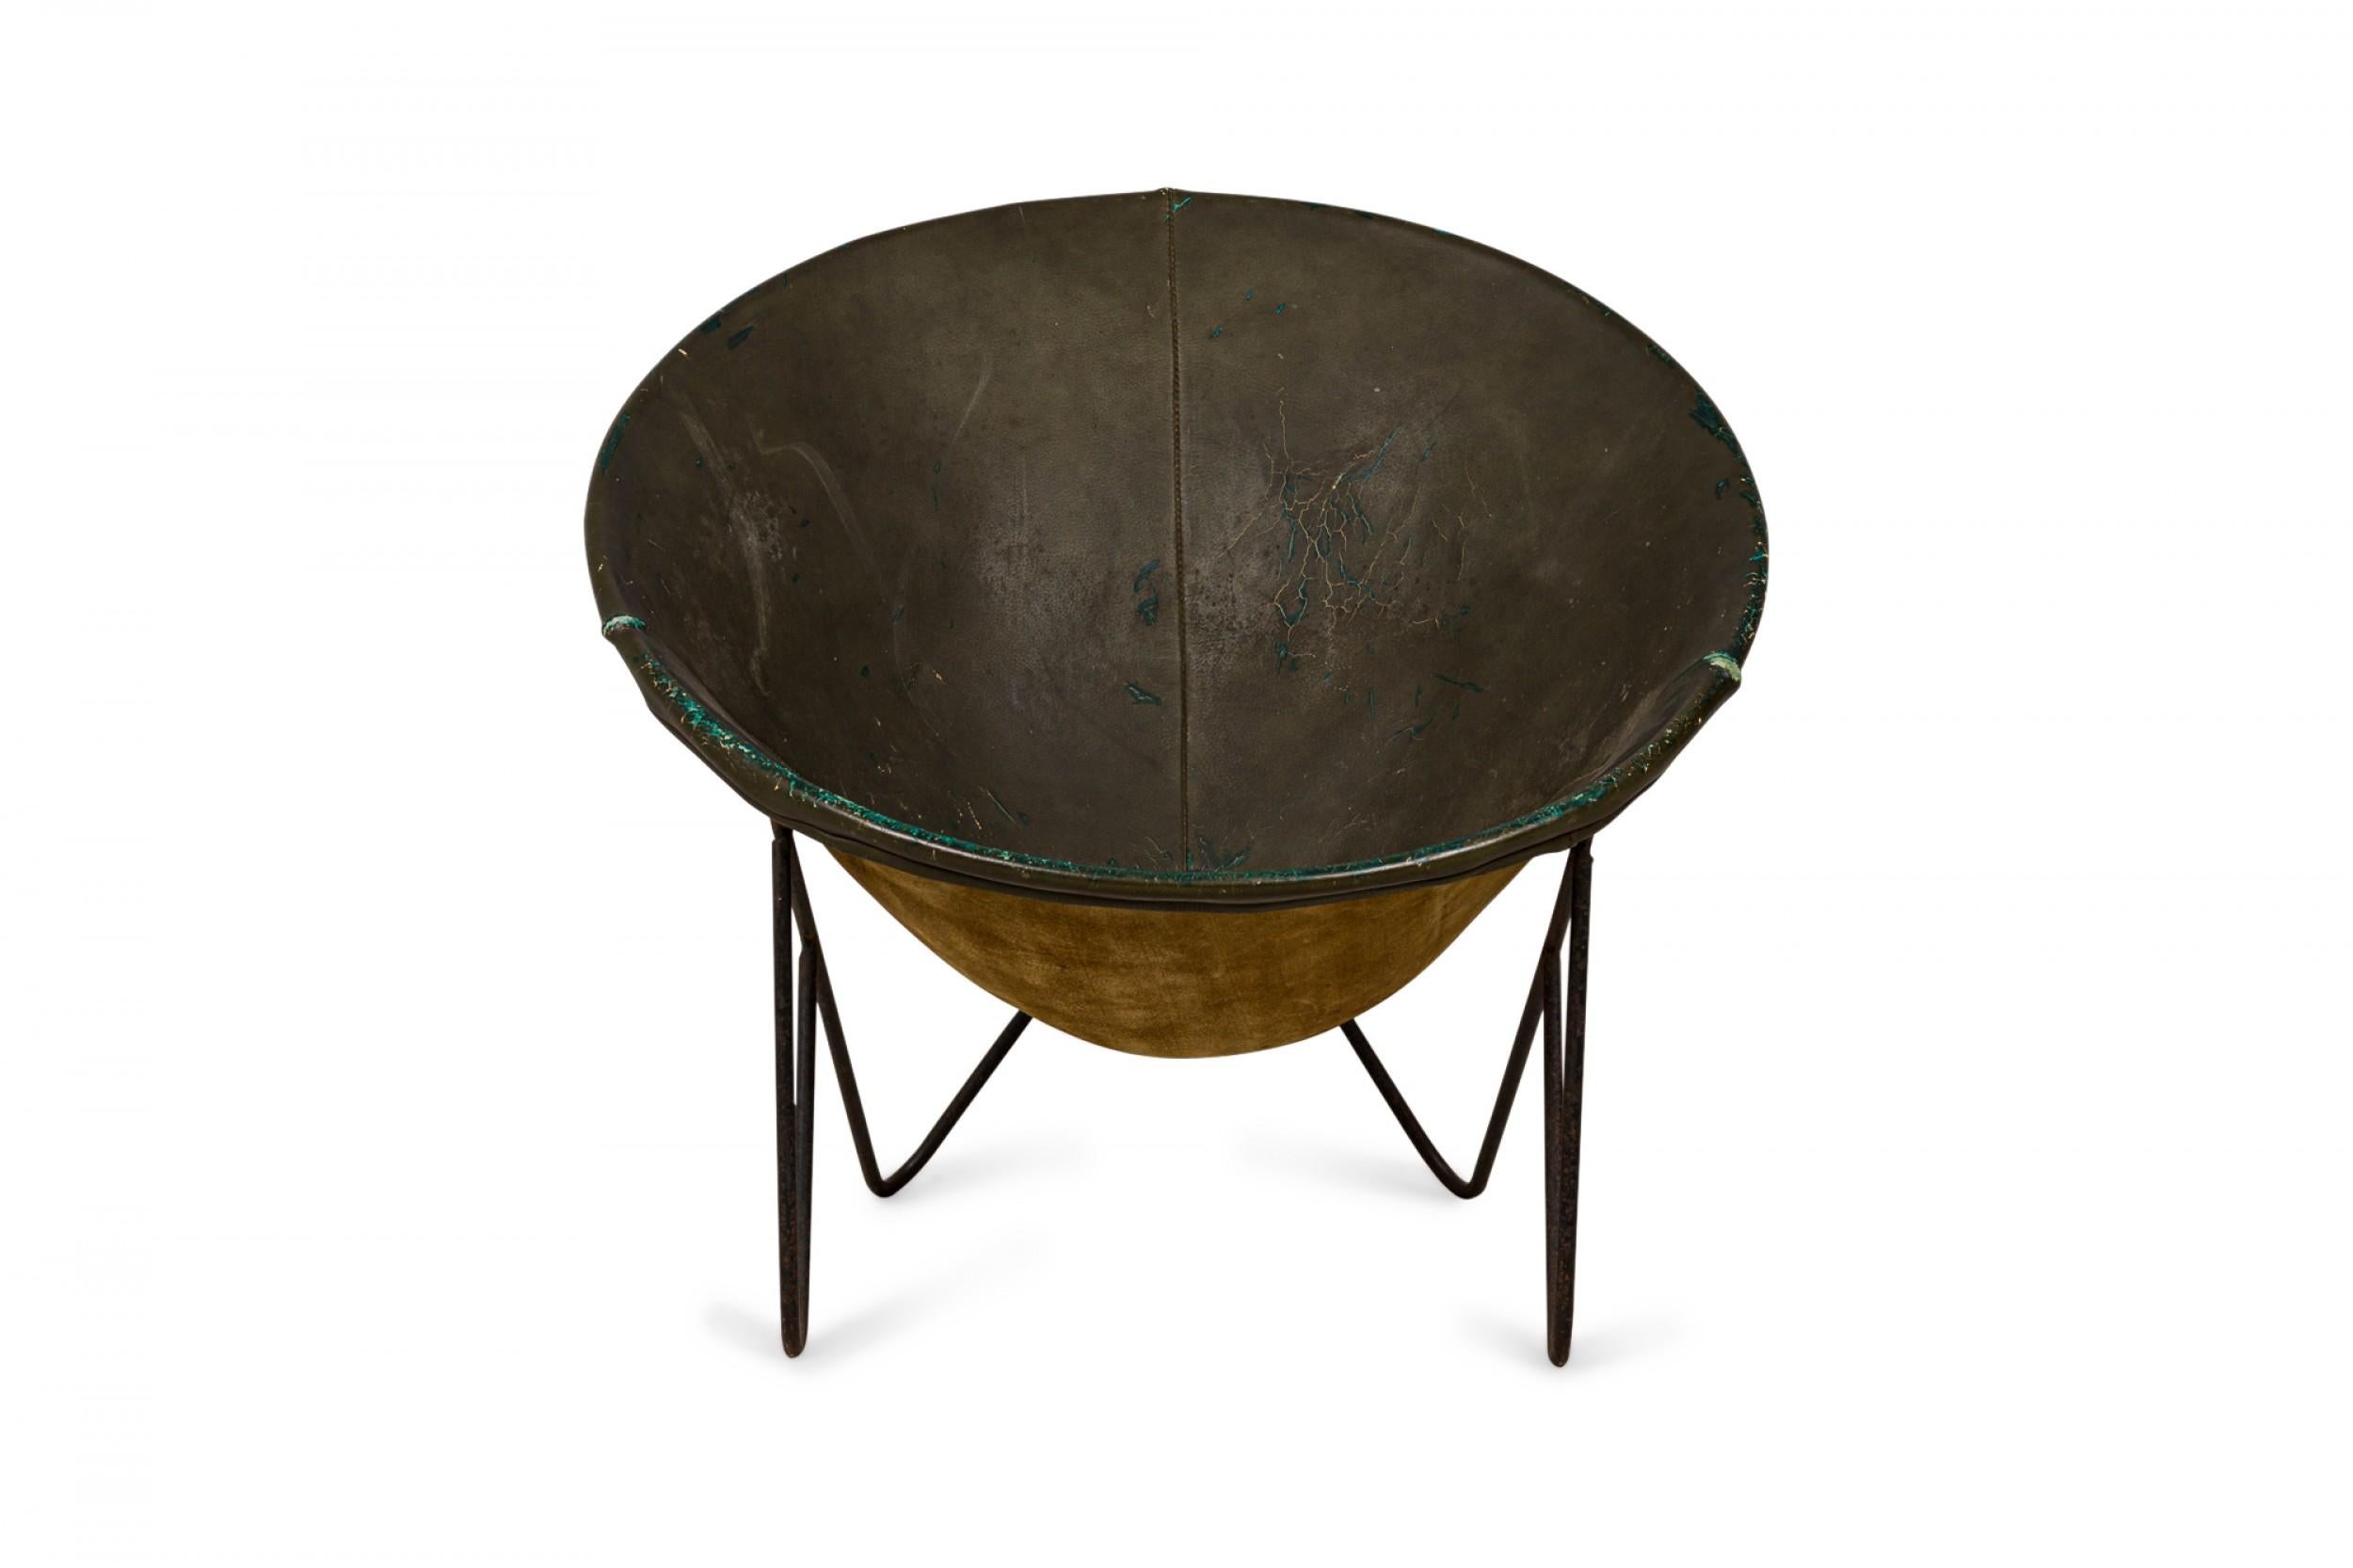 American Mid-Century hoop lounge chair with a dark green leather seat atop a black painted steel hairpin leg frame.
